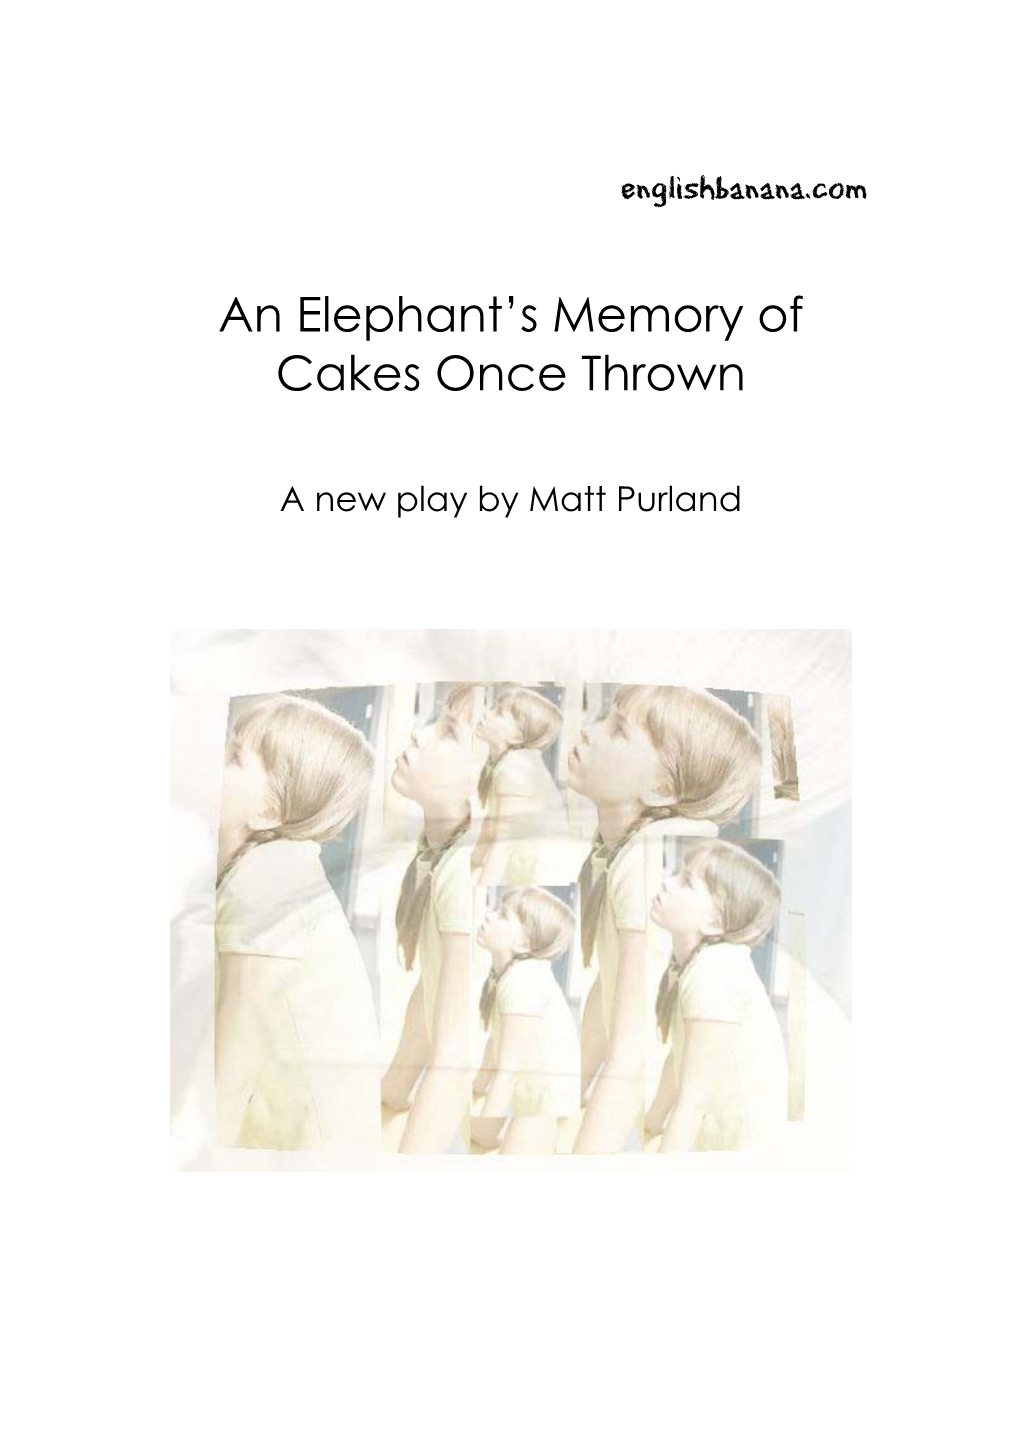 An Elephant's Memory of Cakes Once Thrown